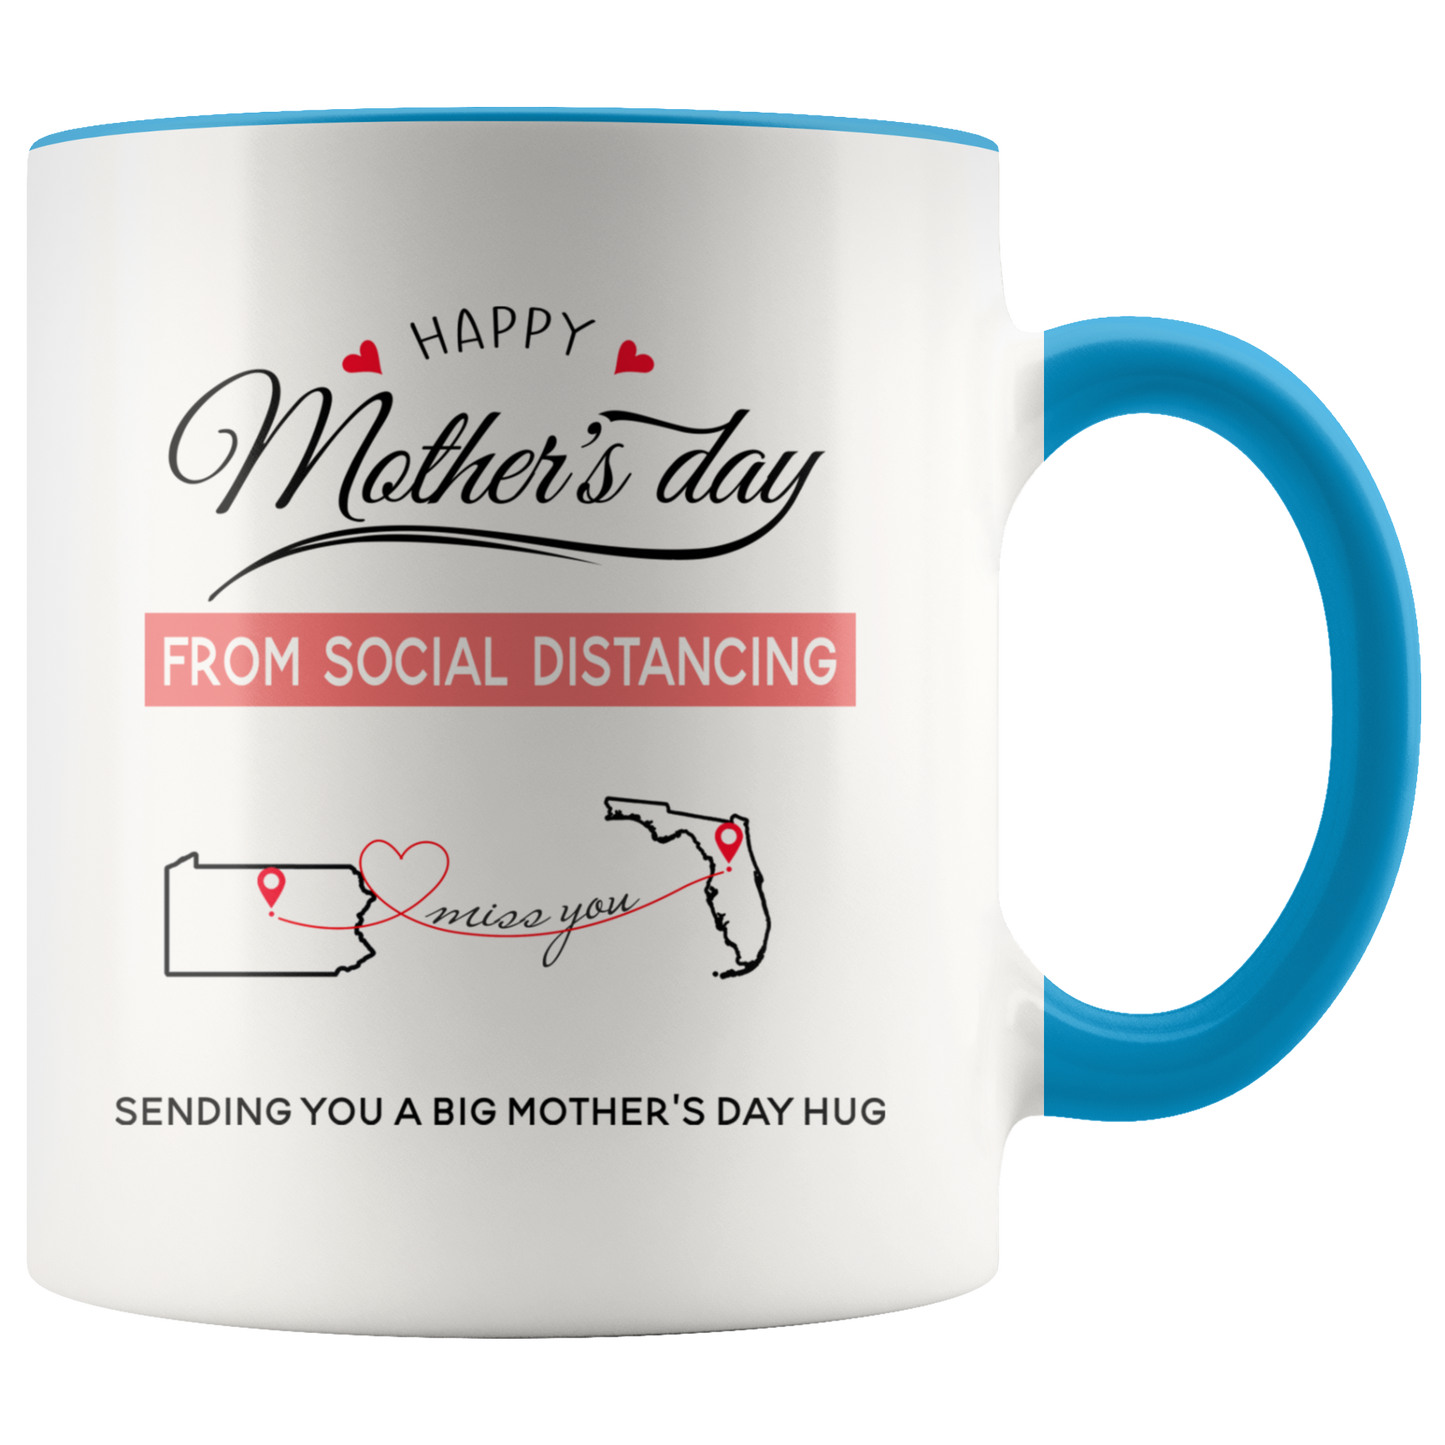 ND-21436354-sp-26126 - [ Pennsylvania | Florida ] (CC_Accent_Mug_) Happy Mothers Day From Social Distancing, Sending You A Big